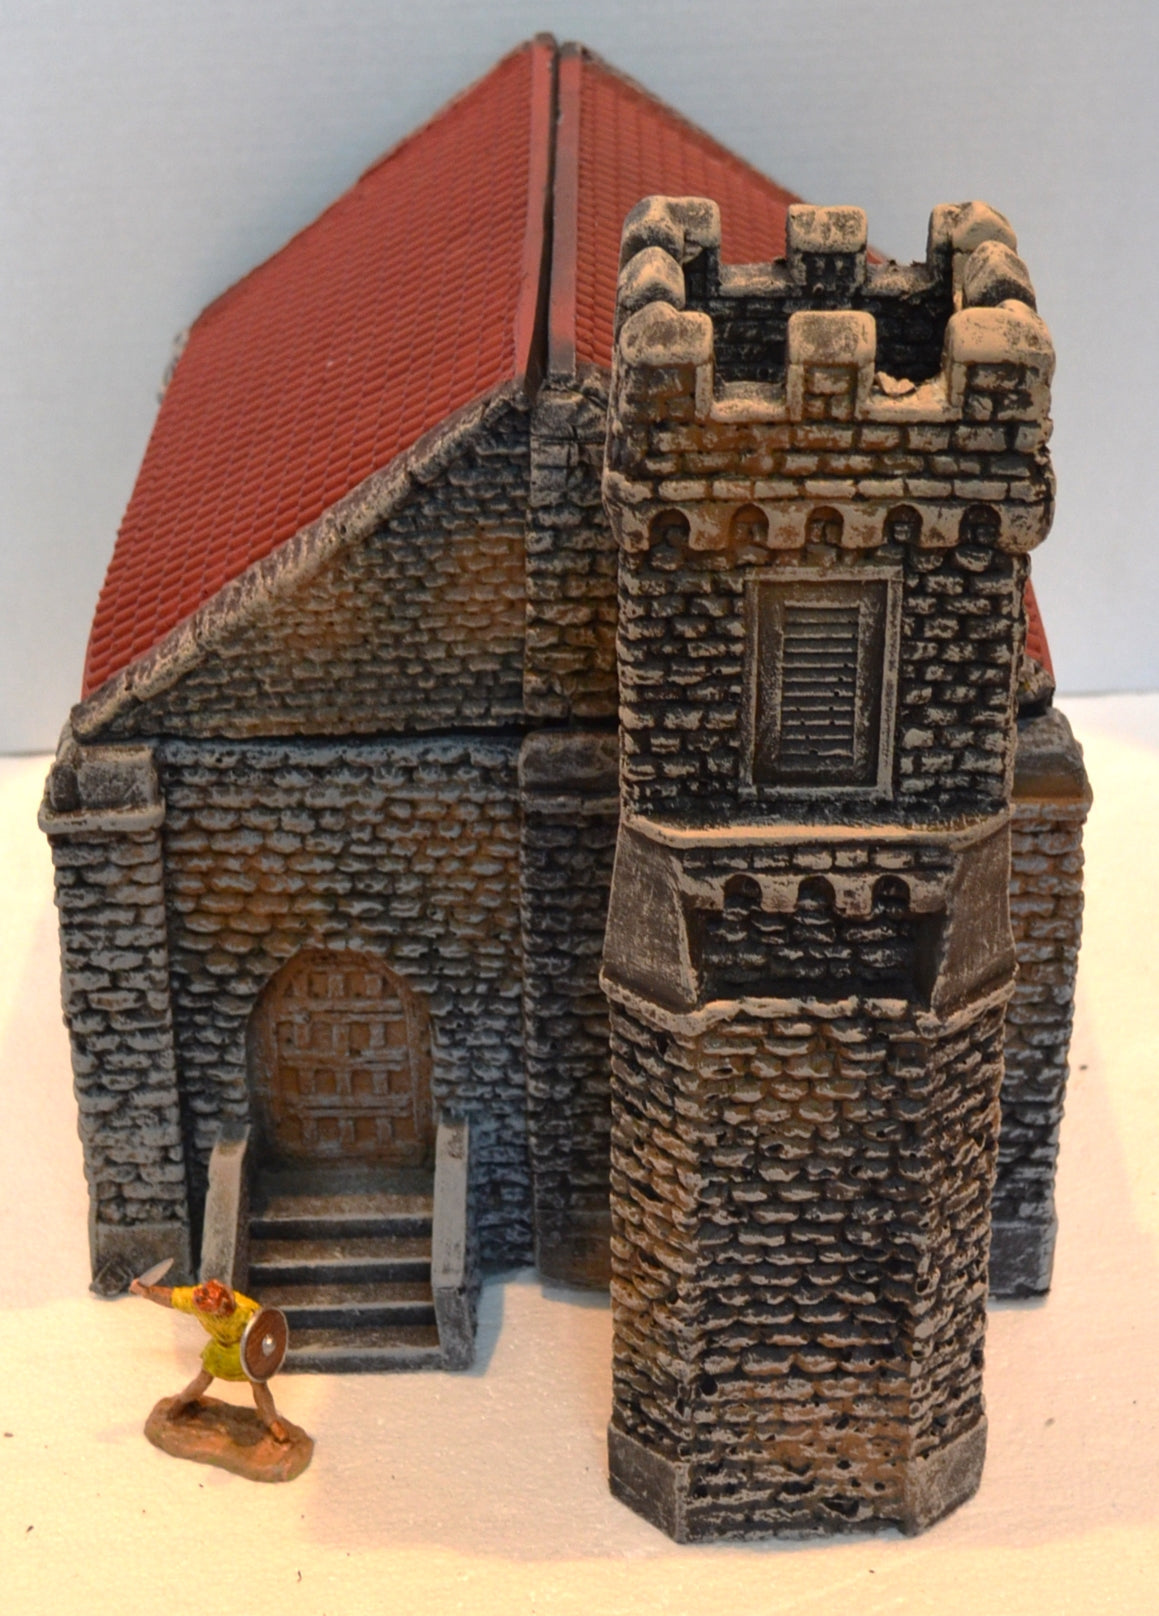 ATHERTON SCENICS PAINTED MEDIEVAL STONE CHURCH WWII - 9947